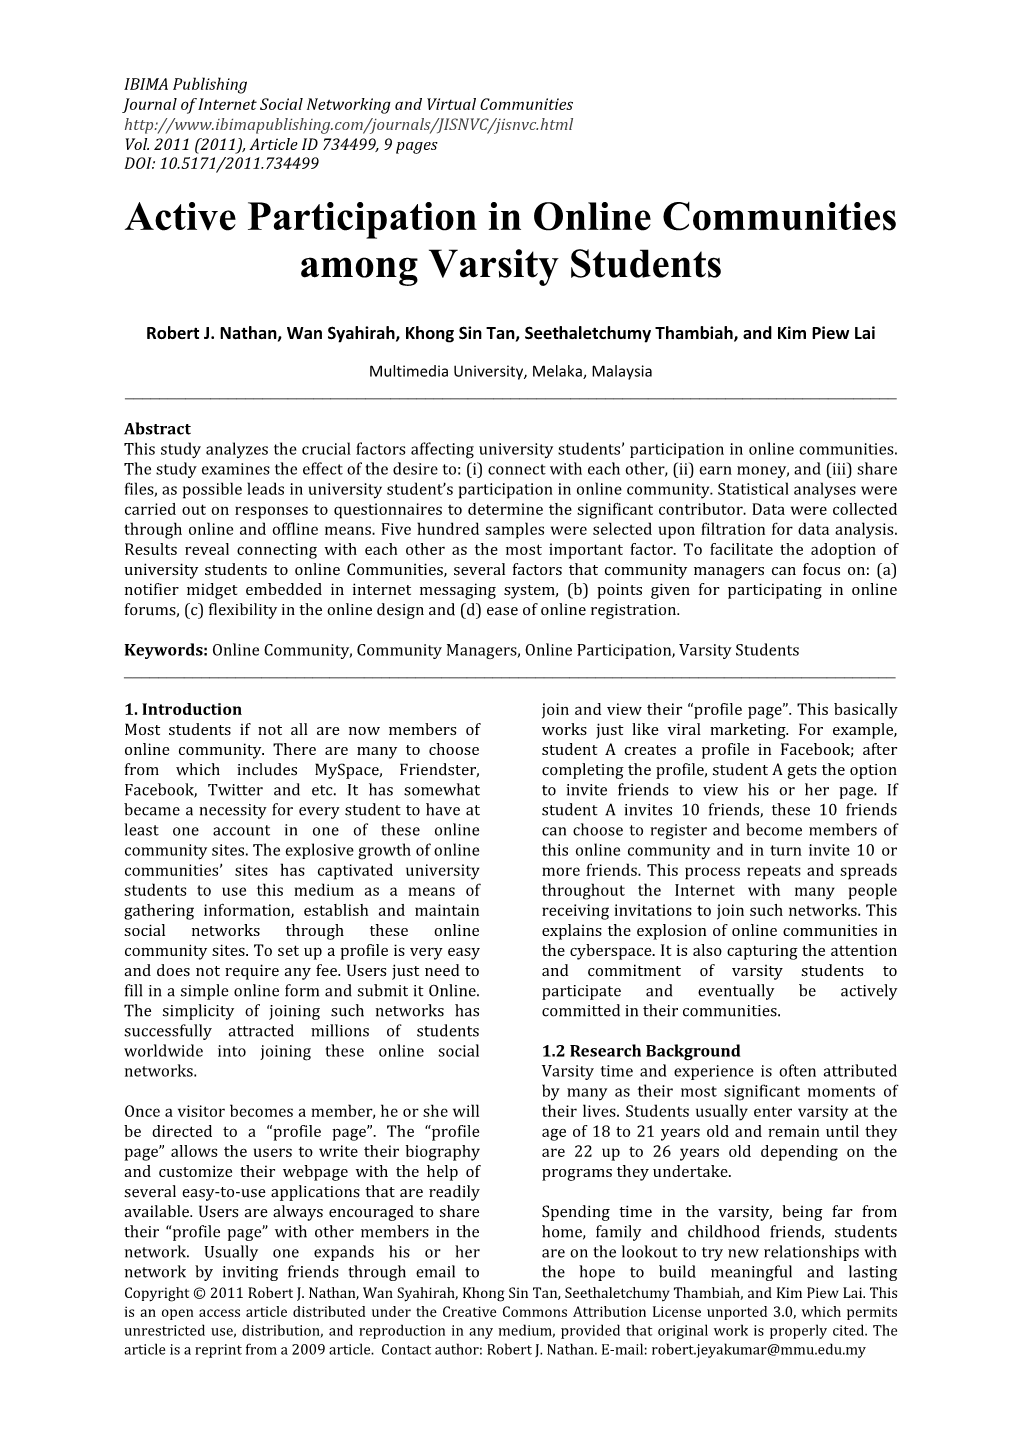 Active Participation in Online Communities Among Varsity Students